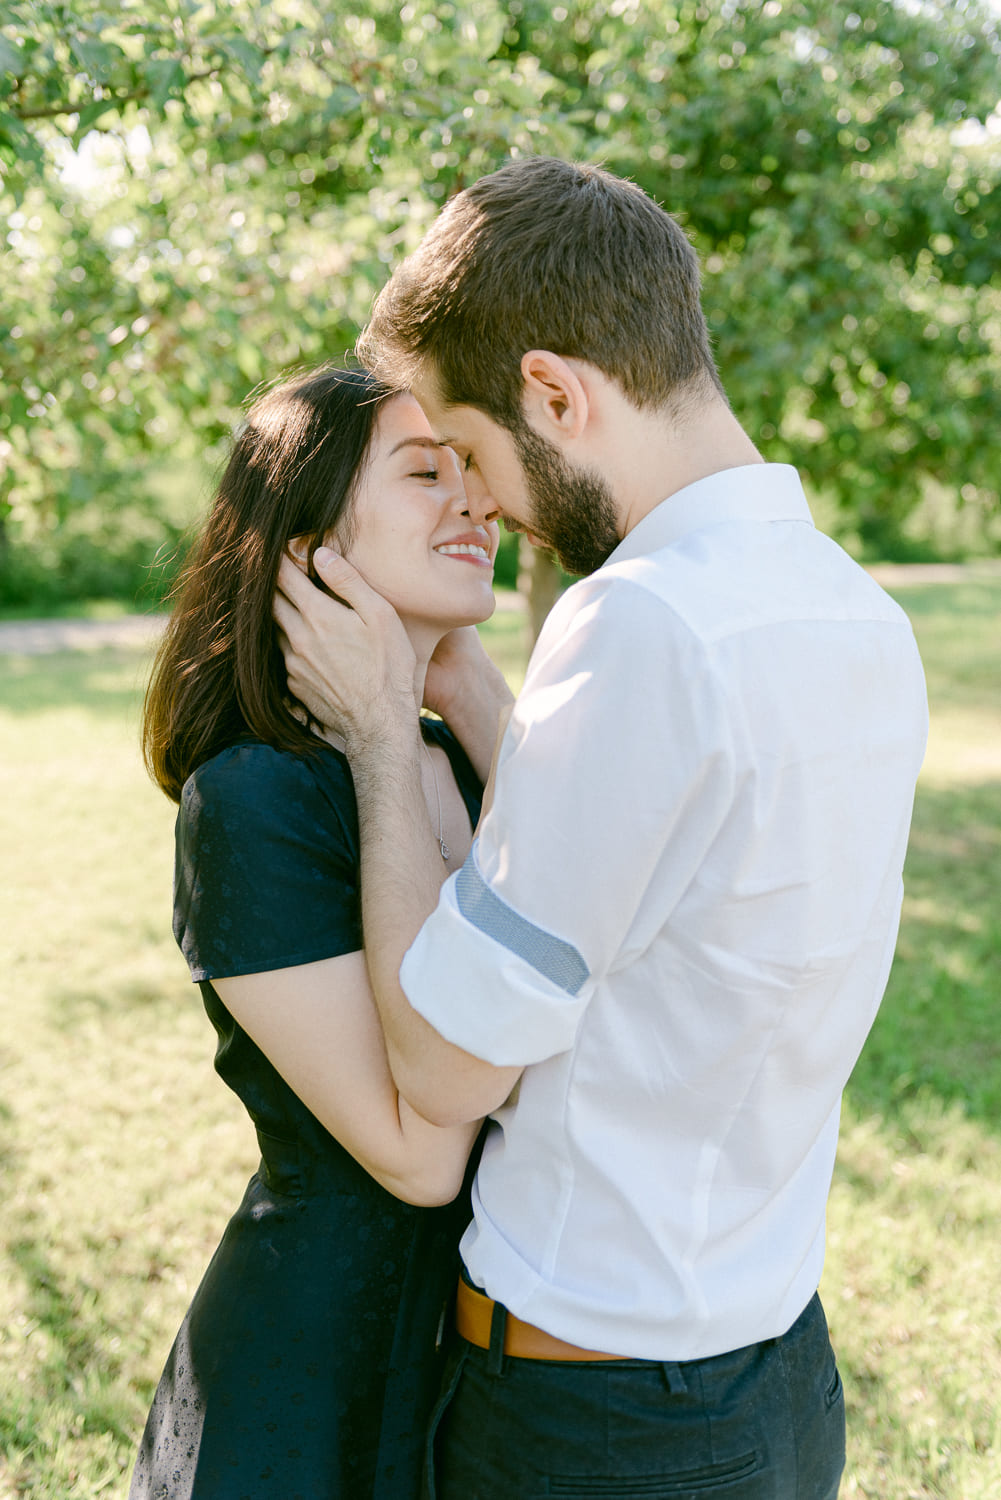 Couple photo from engagement session in Tübingen wedding photographer